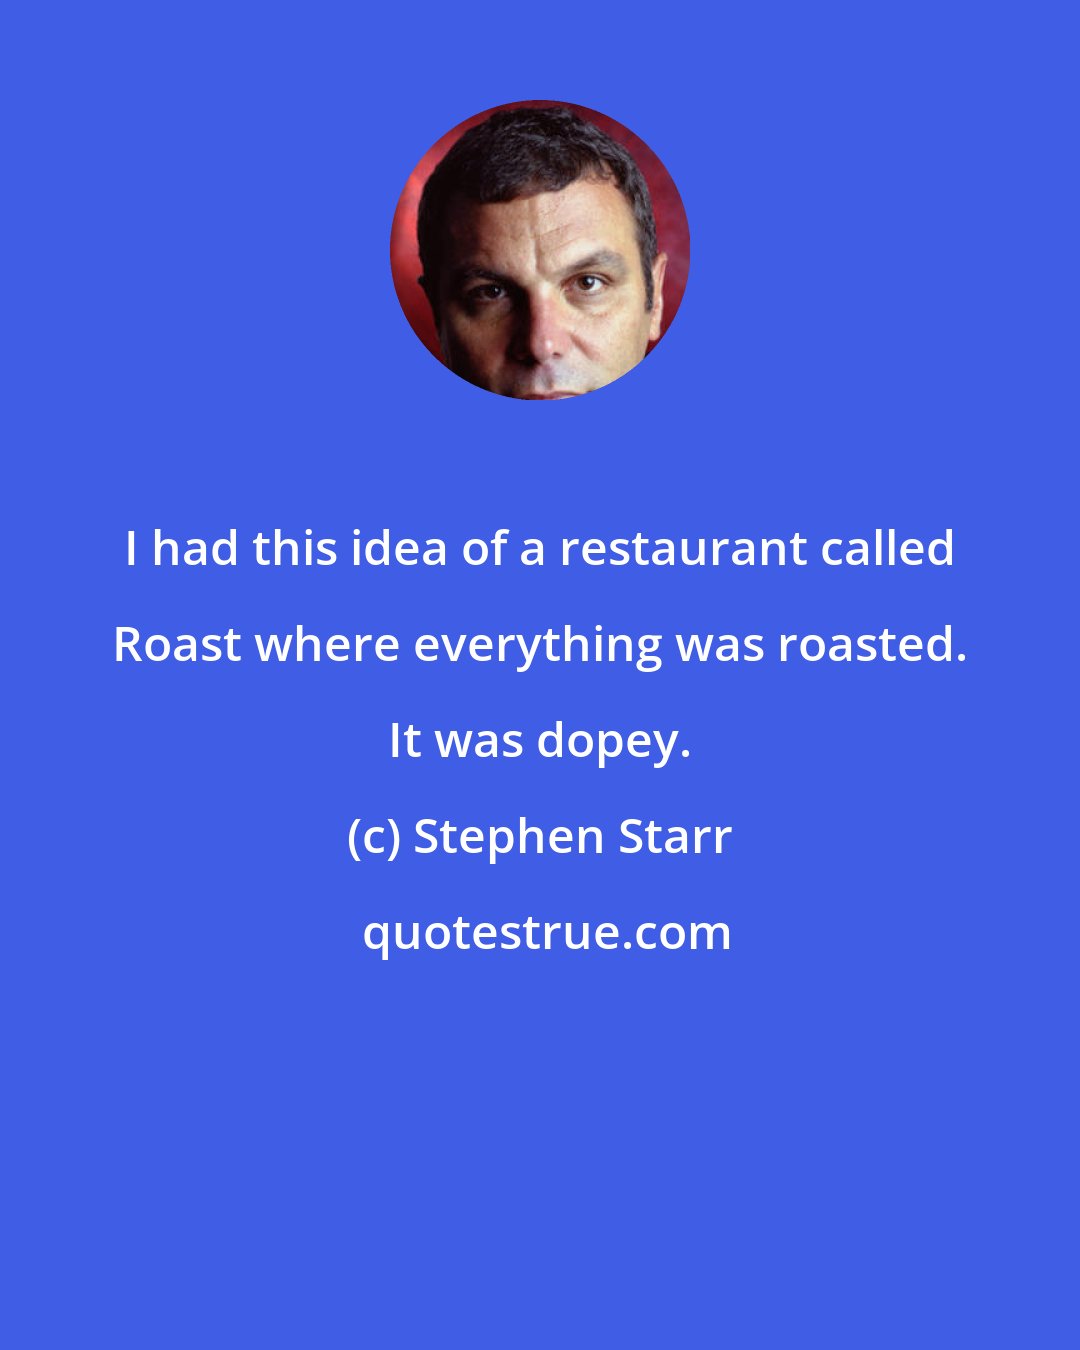 Stephen Starr: I had this idea of a restaurant called Roast where everything was roasted. It was dopey.